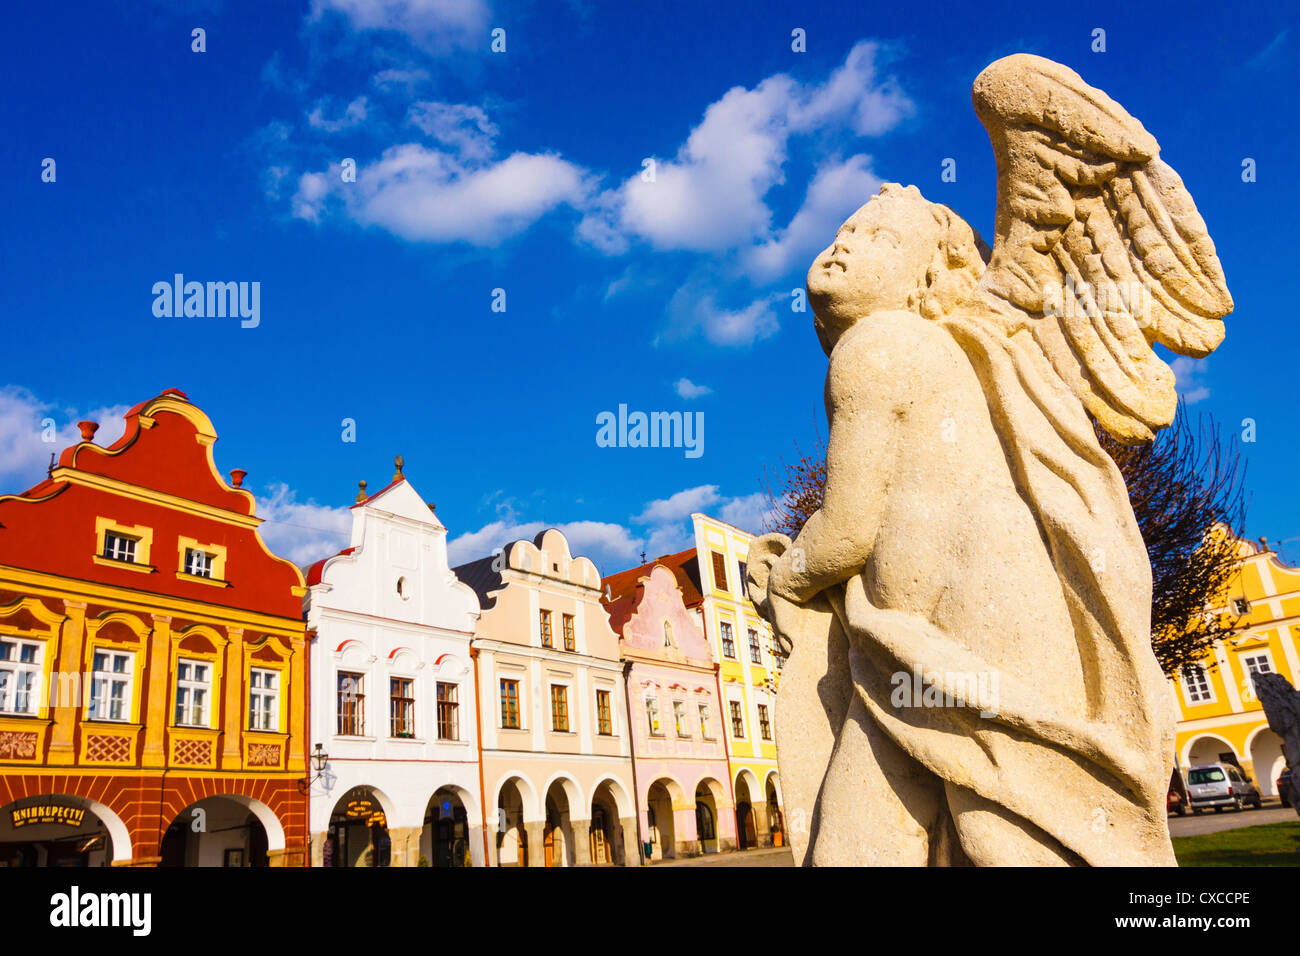 Angel statue and colorful houses at Telch Main Square. Czech Republic Stock Photo